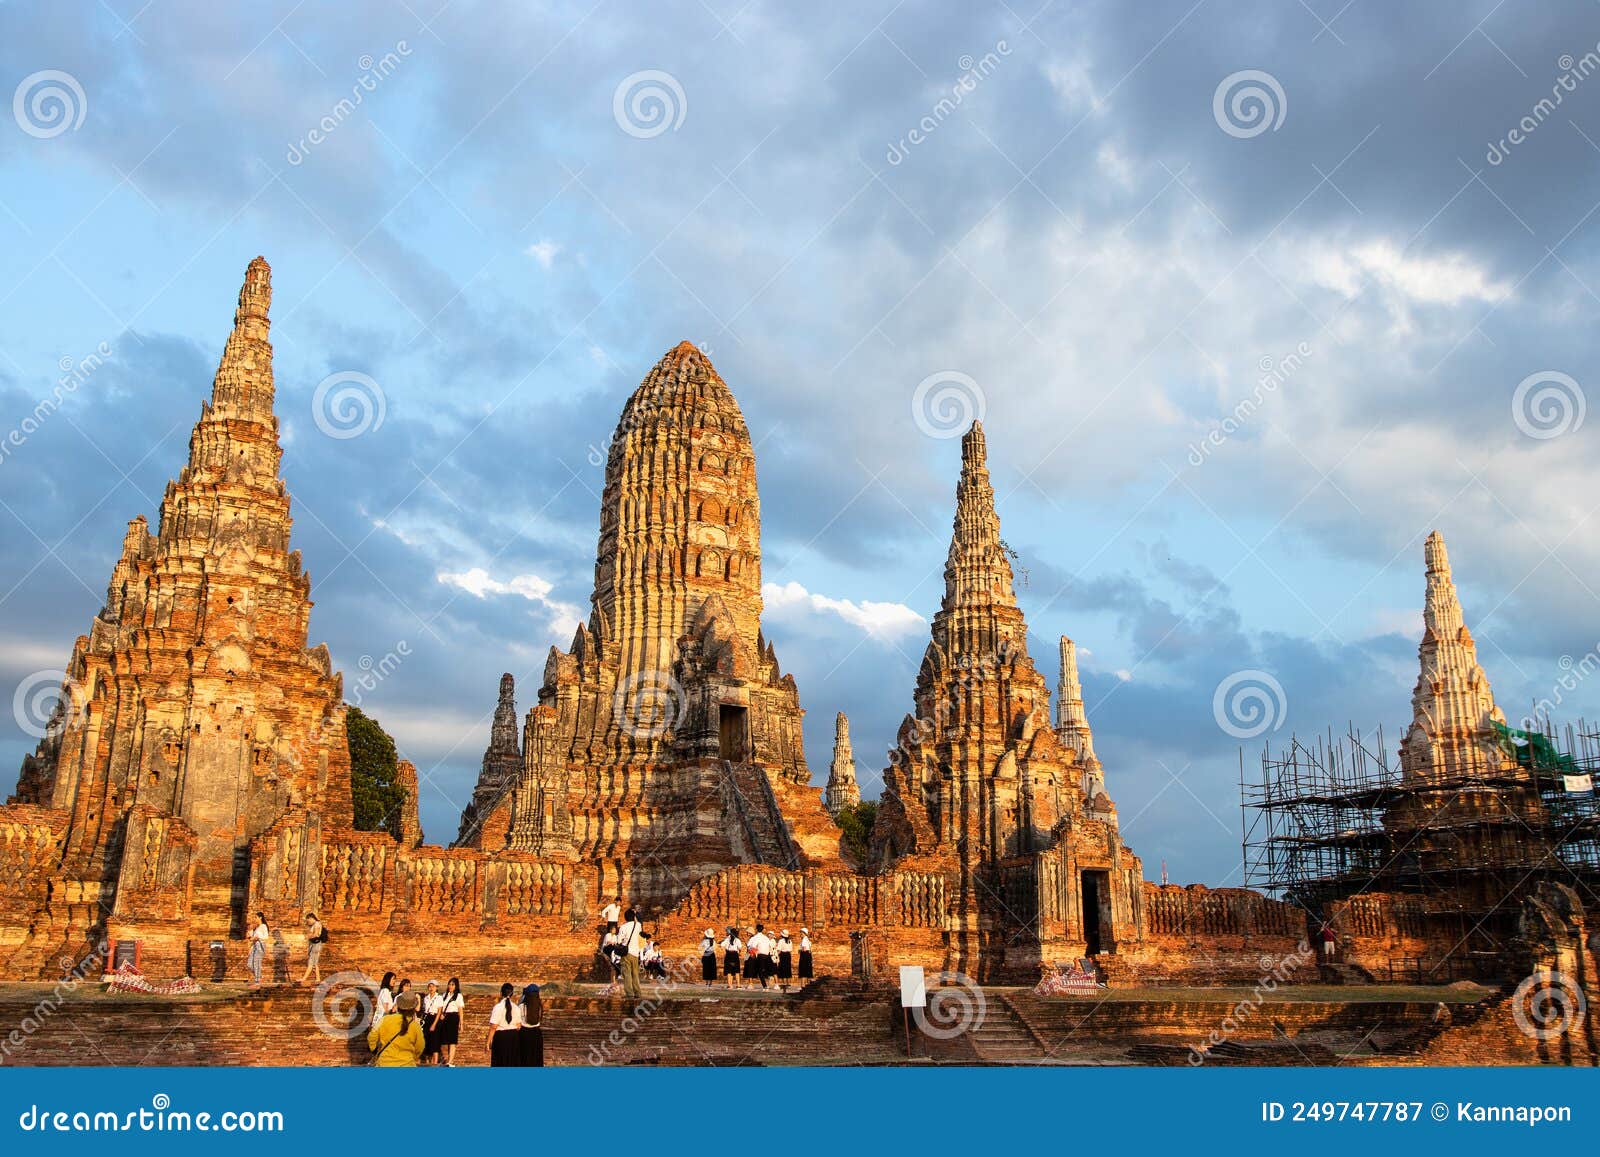 People Travel To Wat Chaiwatthanaram Temple in Phra Nakhon Si Ayutthaya Province, Central Editorial Photography - Image of ayutthaya: 249747787